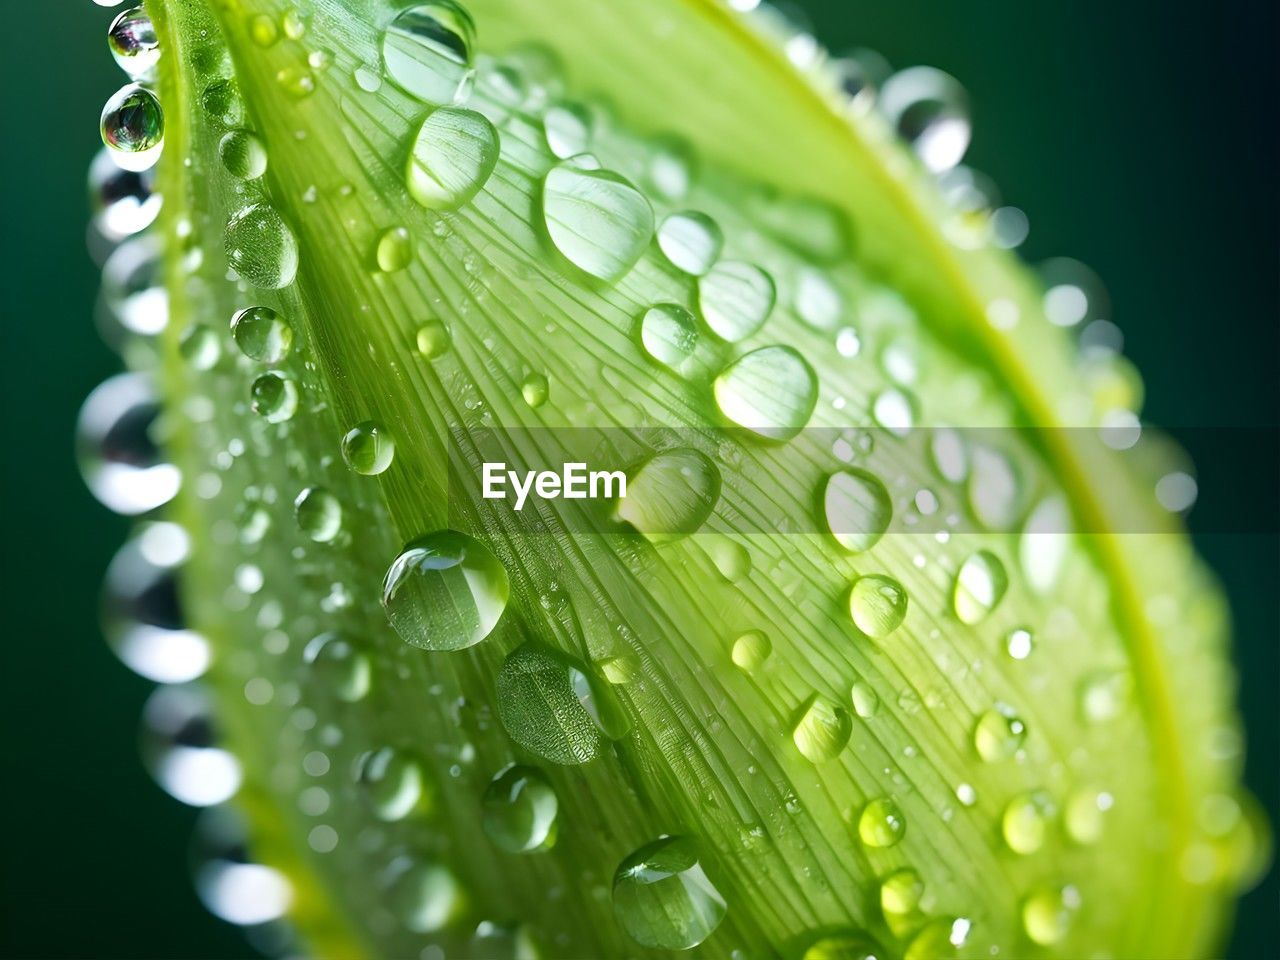 water, drop, dew, wet, green, moisture, freshness, close-up, nature, plant, leaf, macro photography, plant part, no people, beauty in nature, plant stem, selective focus, growth, macro, extreme close-up, purity, environment, rain, fragility, outdoors, backgrounds, flower